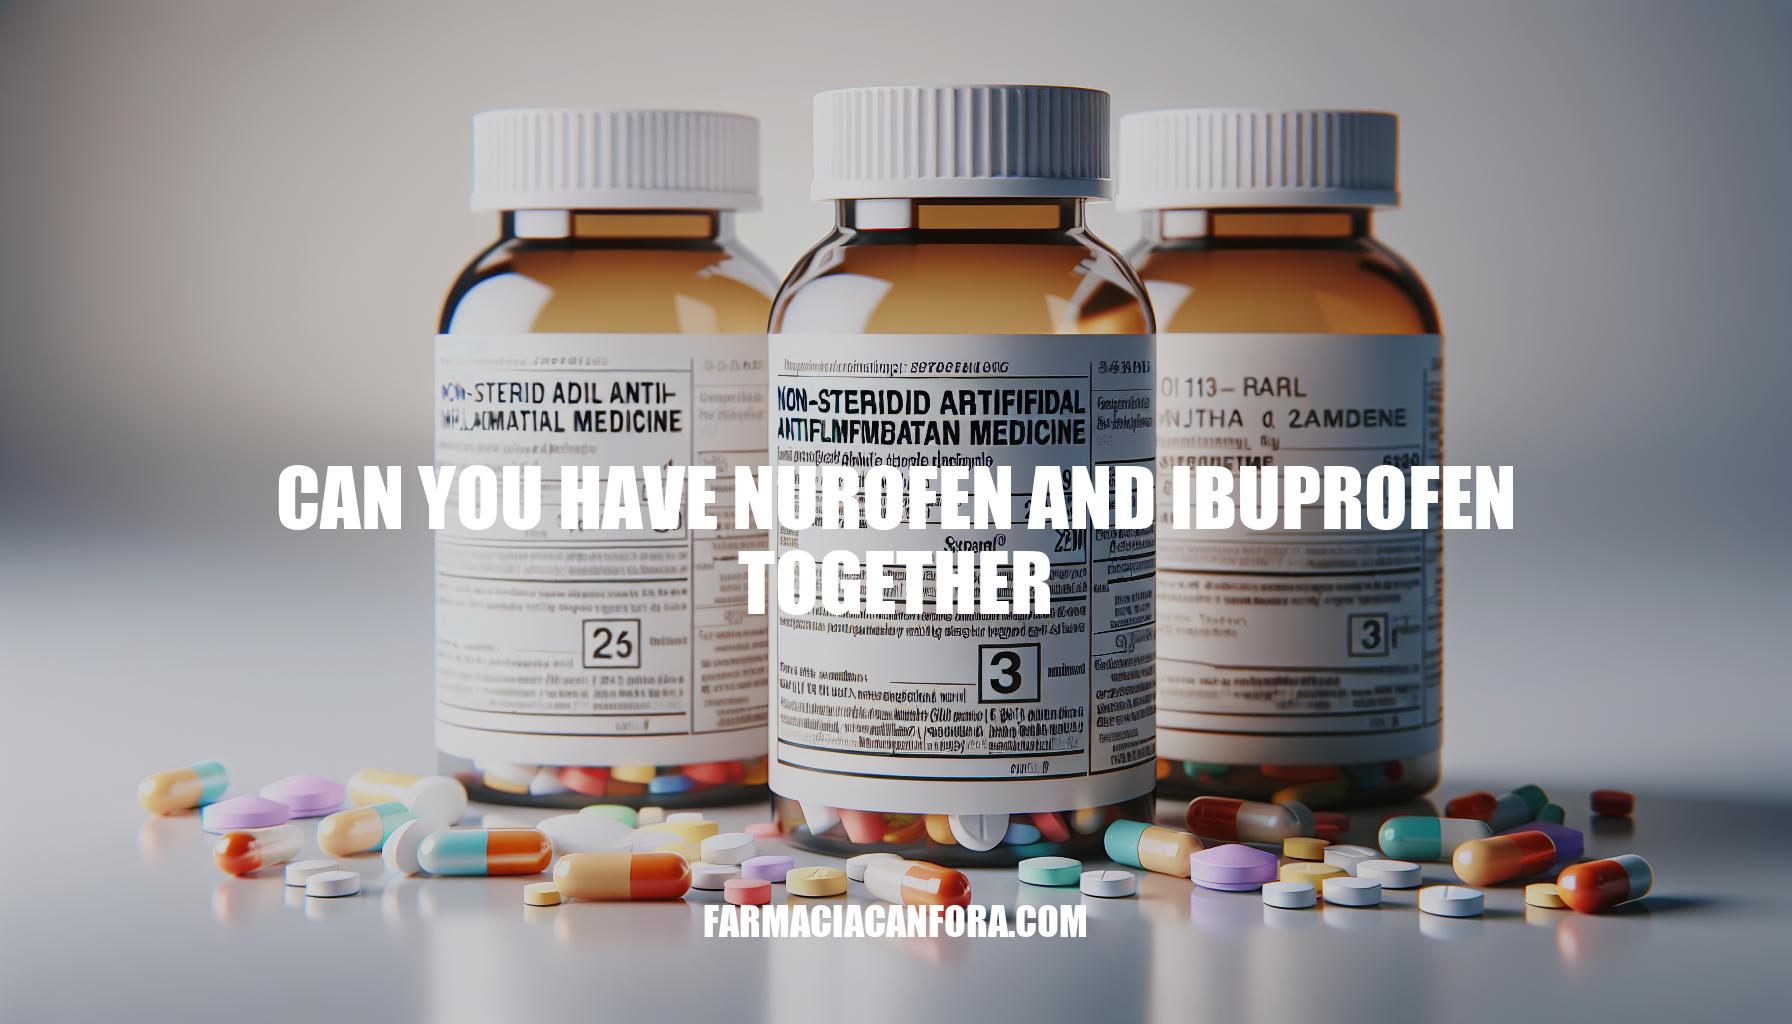 Can You Have Nurofen and Ibuprofen Together: Risks and Alternatives